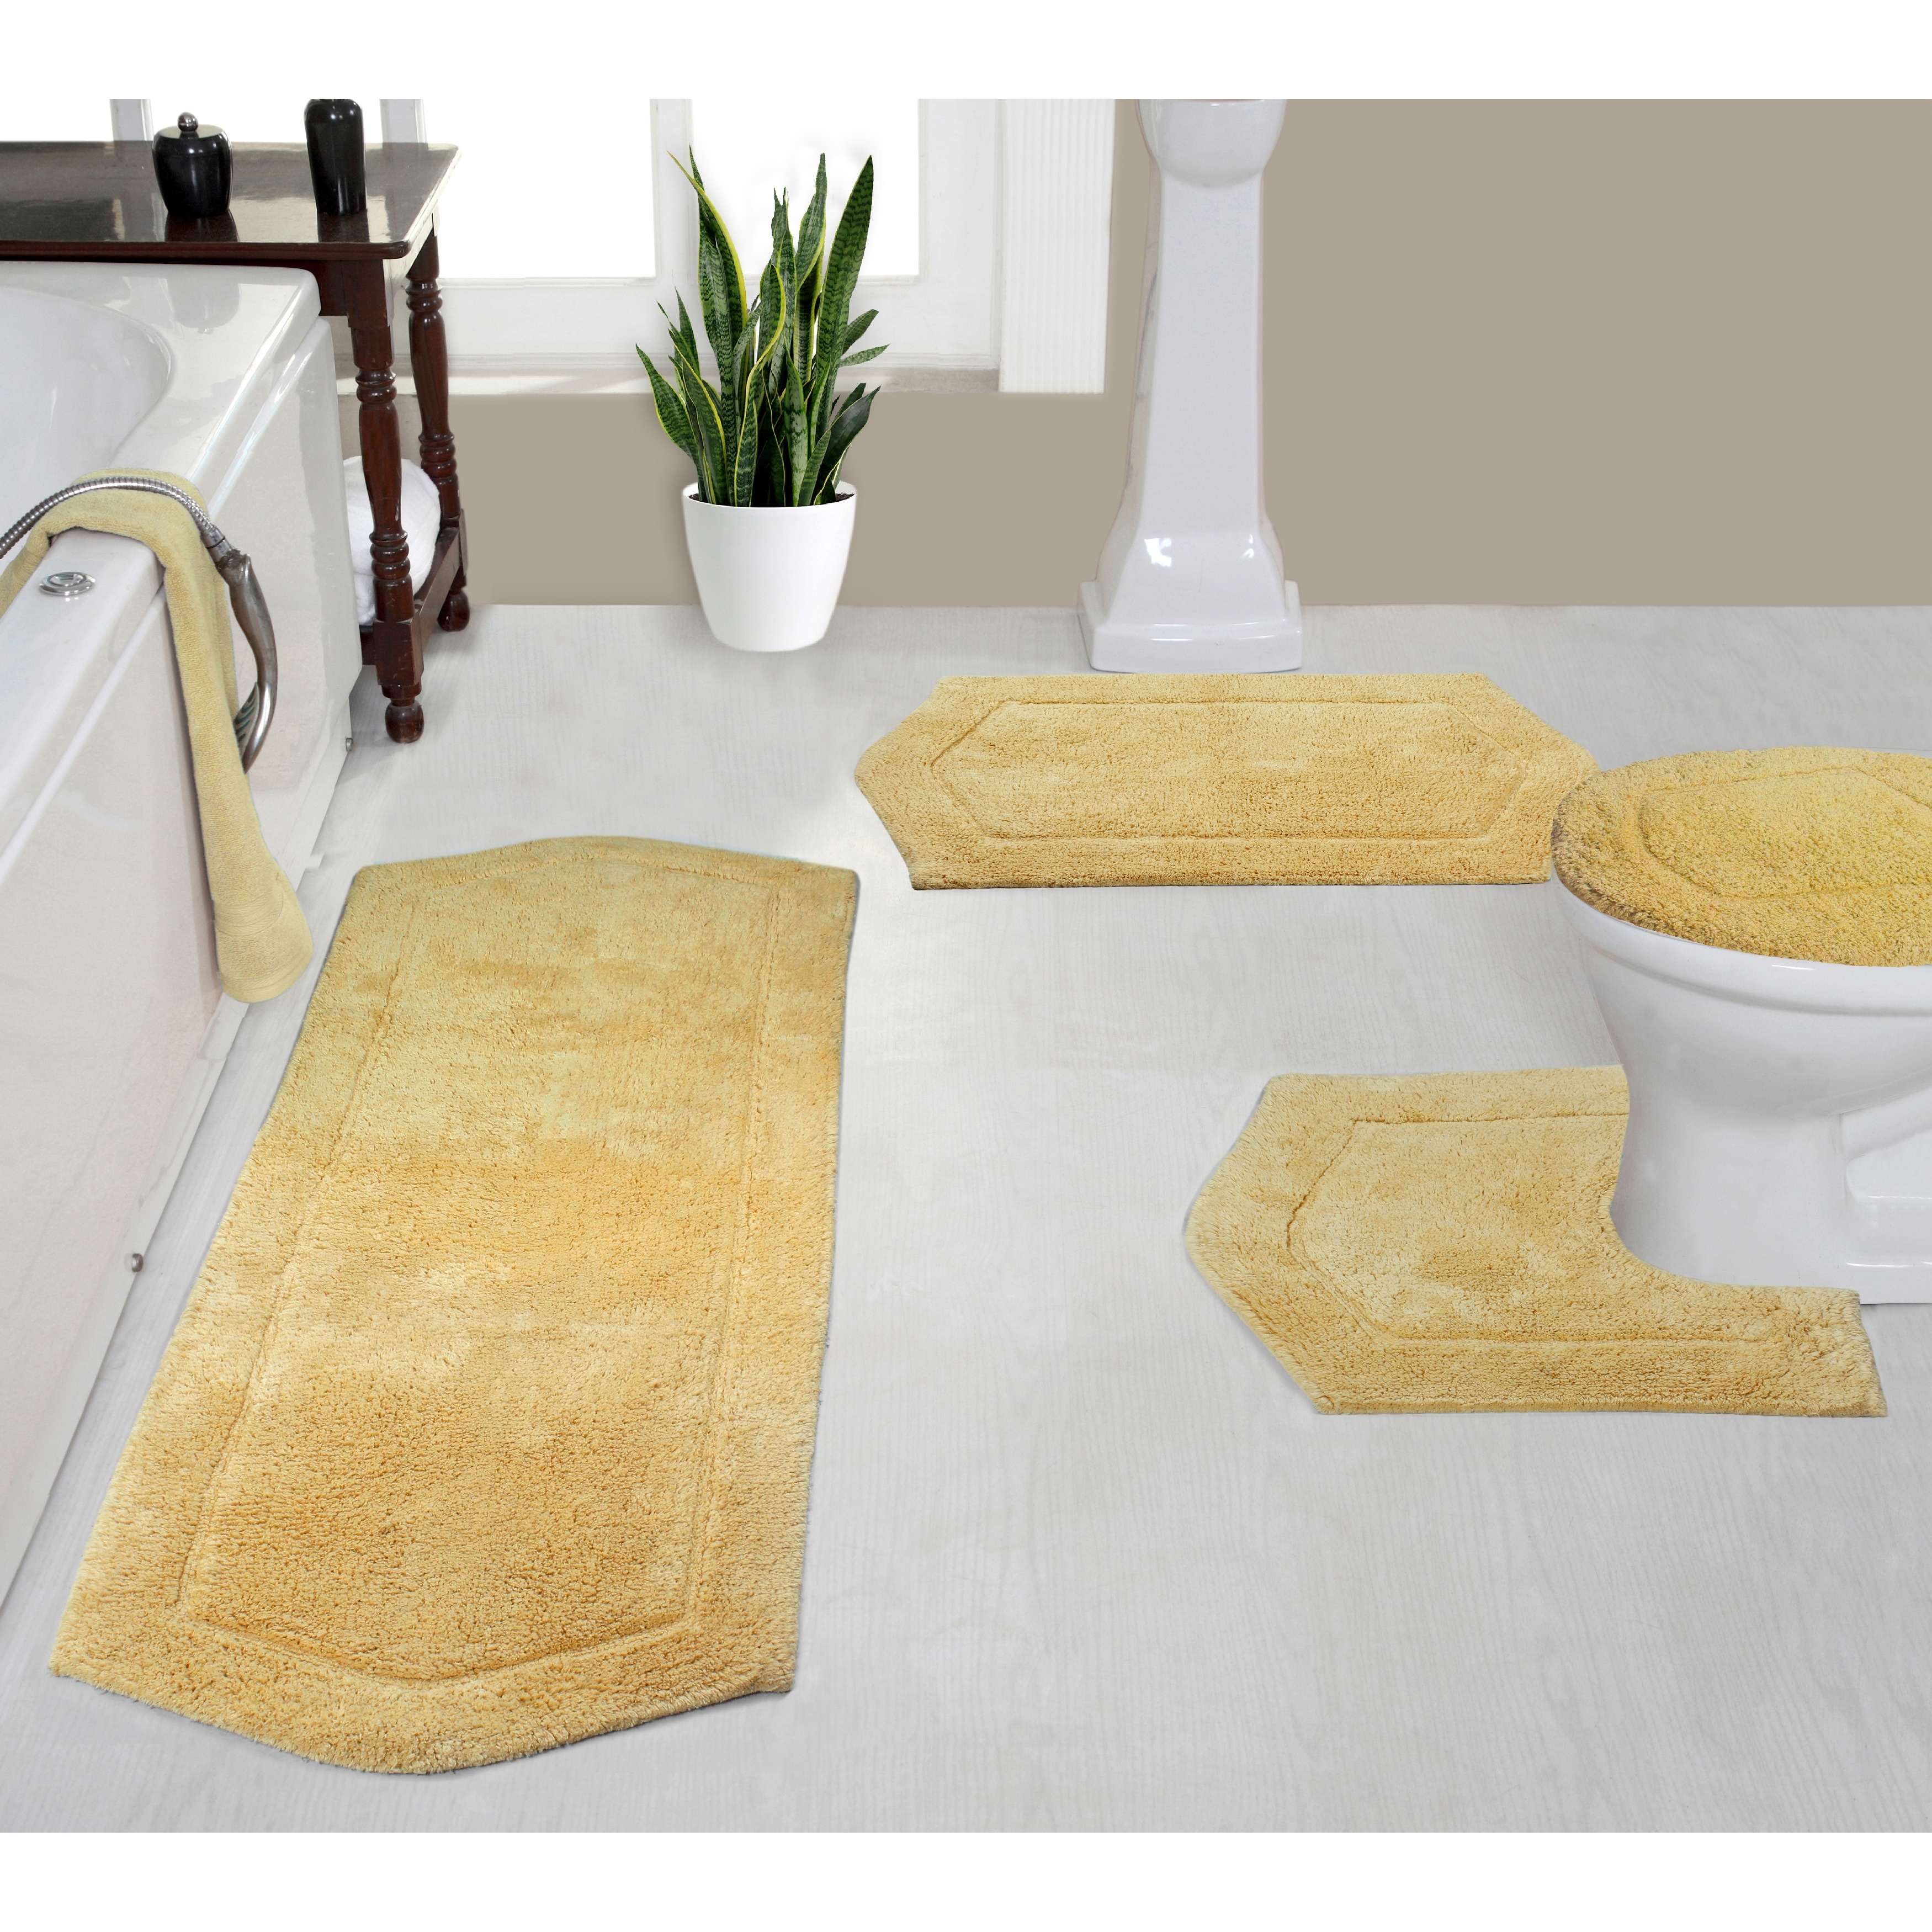 https://ak1.ostkcdn.com/images/products/is/images/direct/60a895dc2d6ae58a2a69d063114f8bf245654470/Waterford-Collection-4-Piece-Set-Bath-Rug-with-Lid-Cover-18%22x18%22%2C-20%22x20%22%2C-21%22x34%22%2C-22%22x60%22.jpg